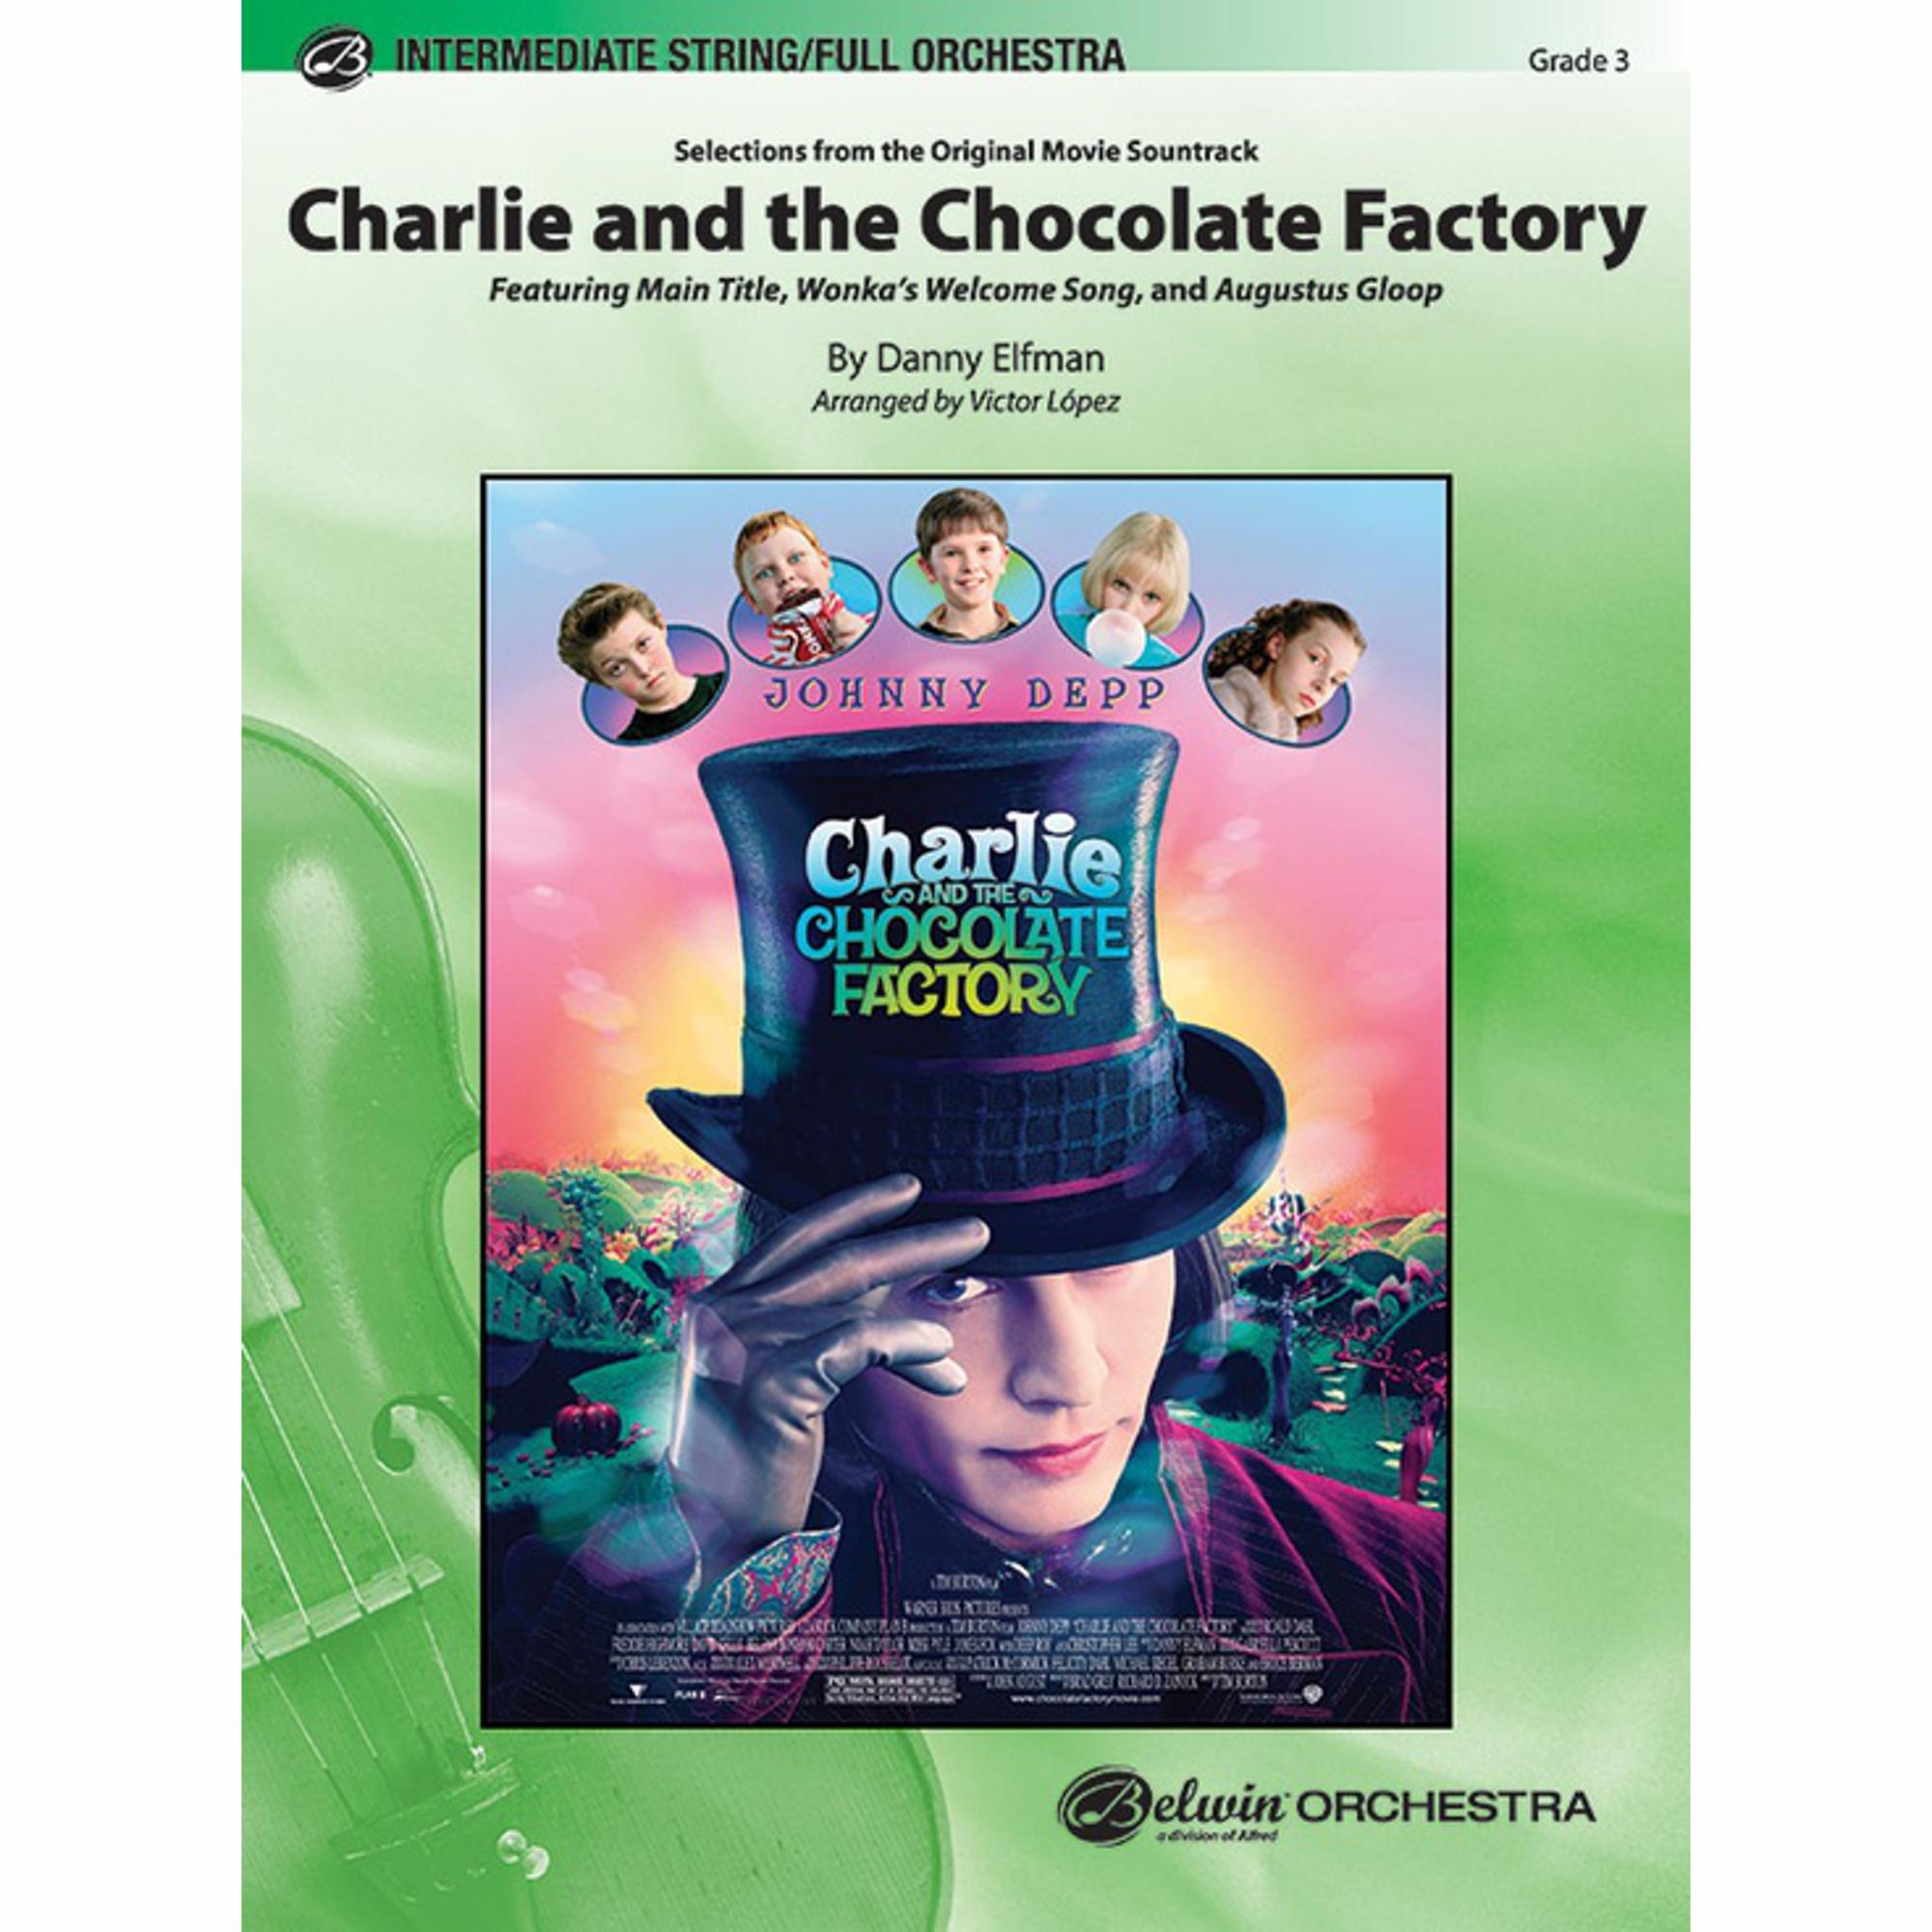 Charlie and The Chocolate Factory, Selections from the Original Movie Soundtrack (Grade 3)